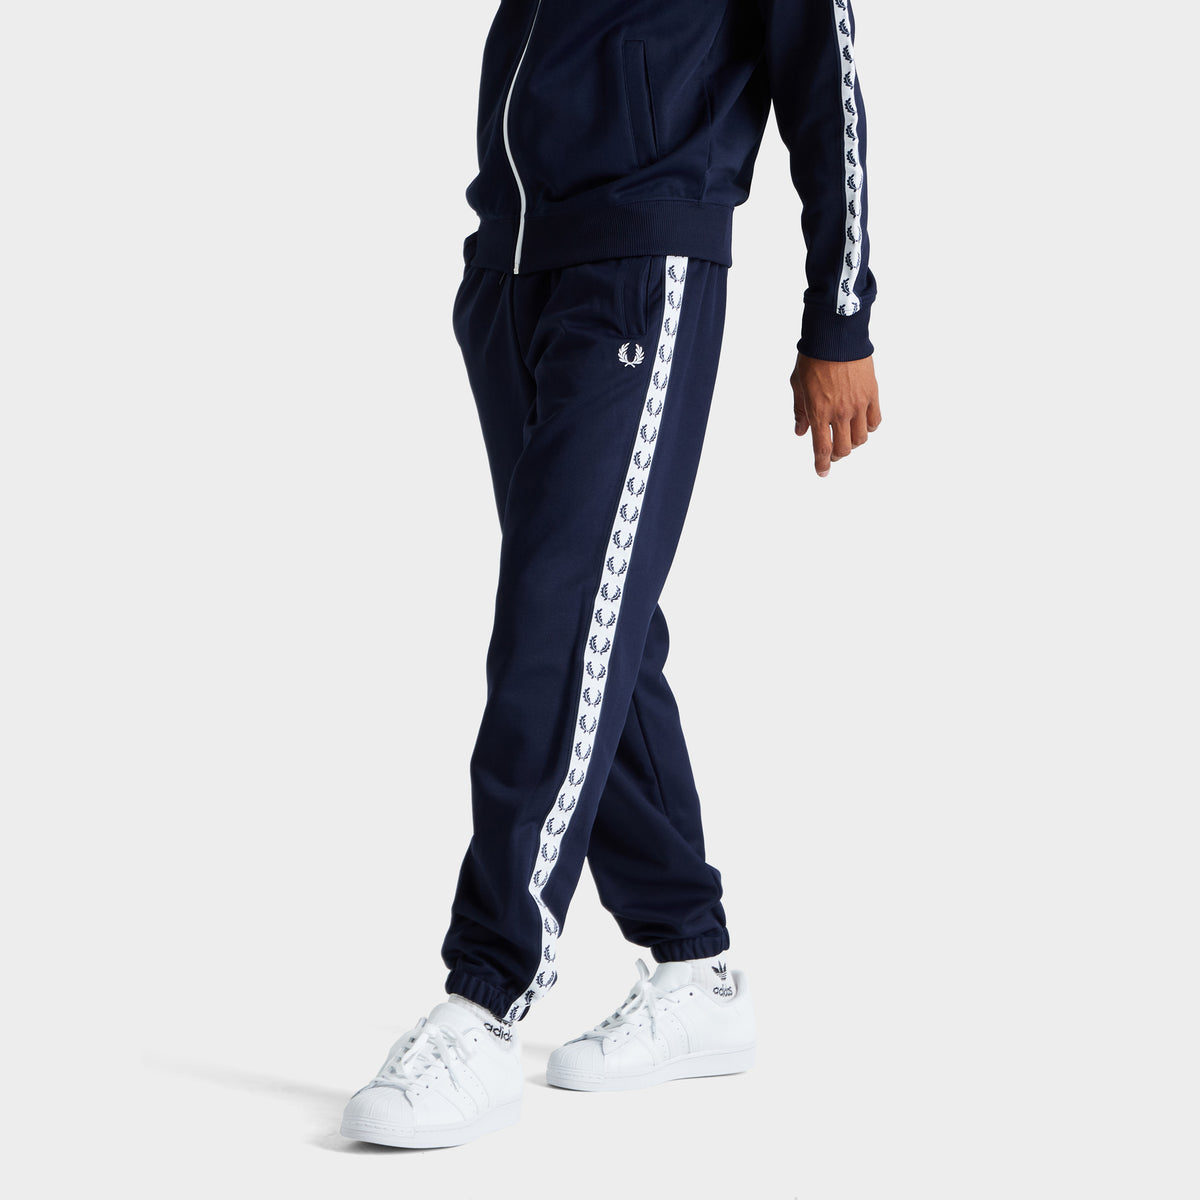 Fred Perry Women's Taped Track Pants / Ecru – size? Canada